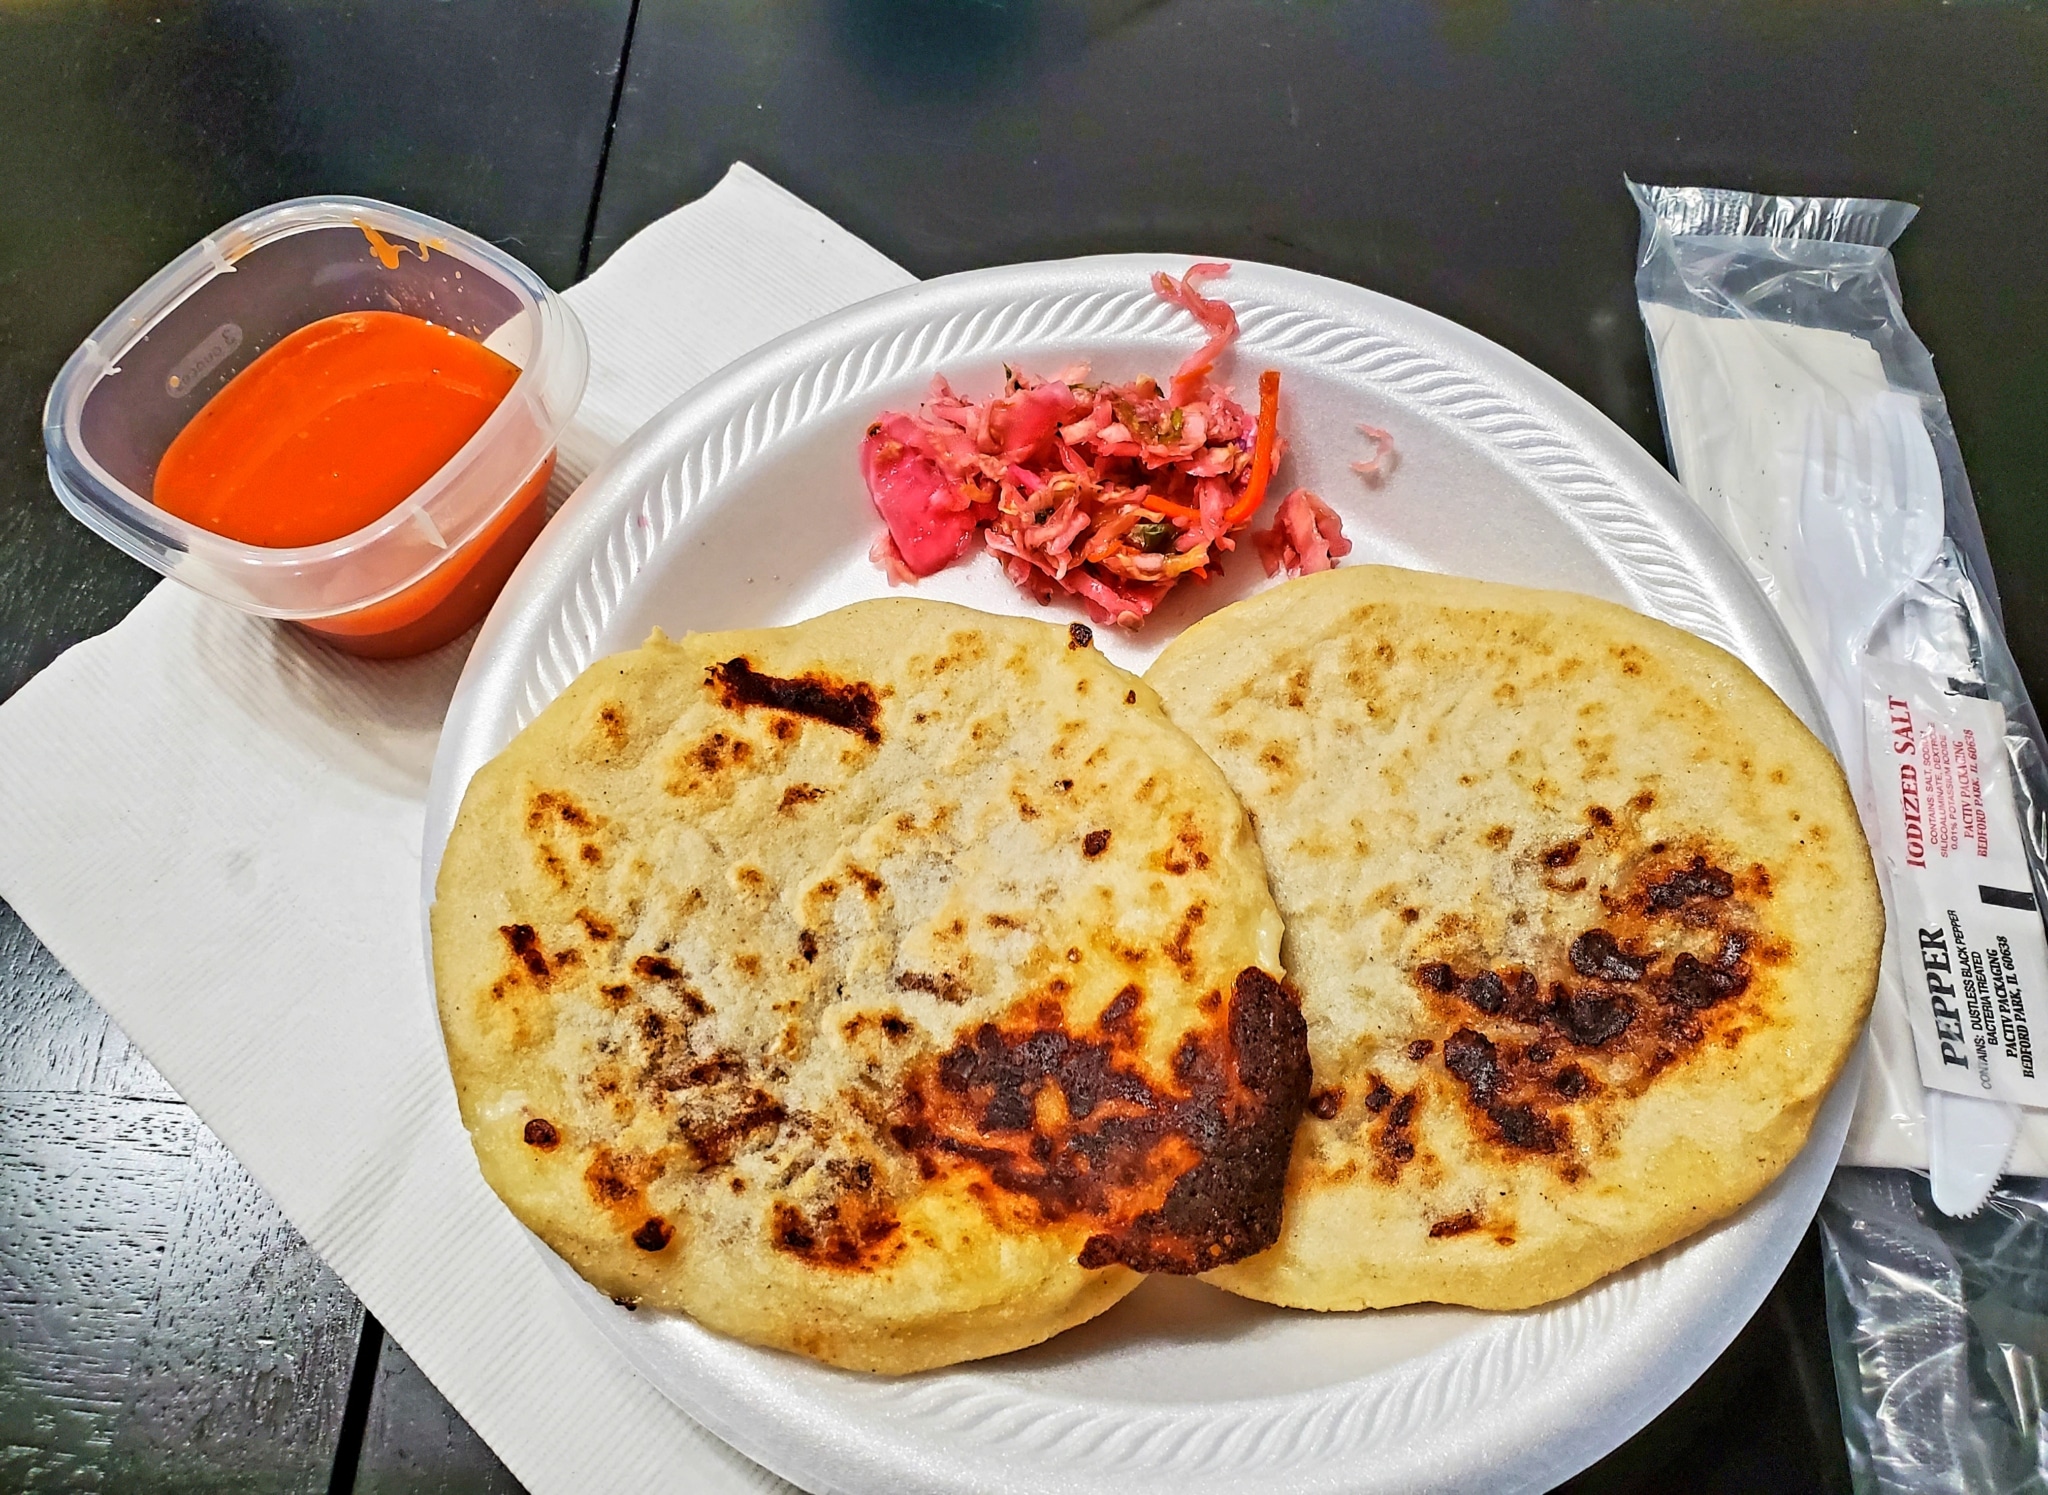 Plate with two pupusas on it and condiments on the side.